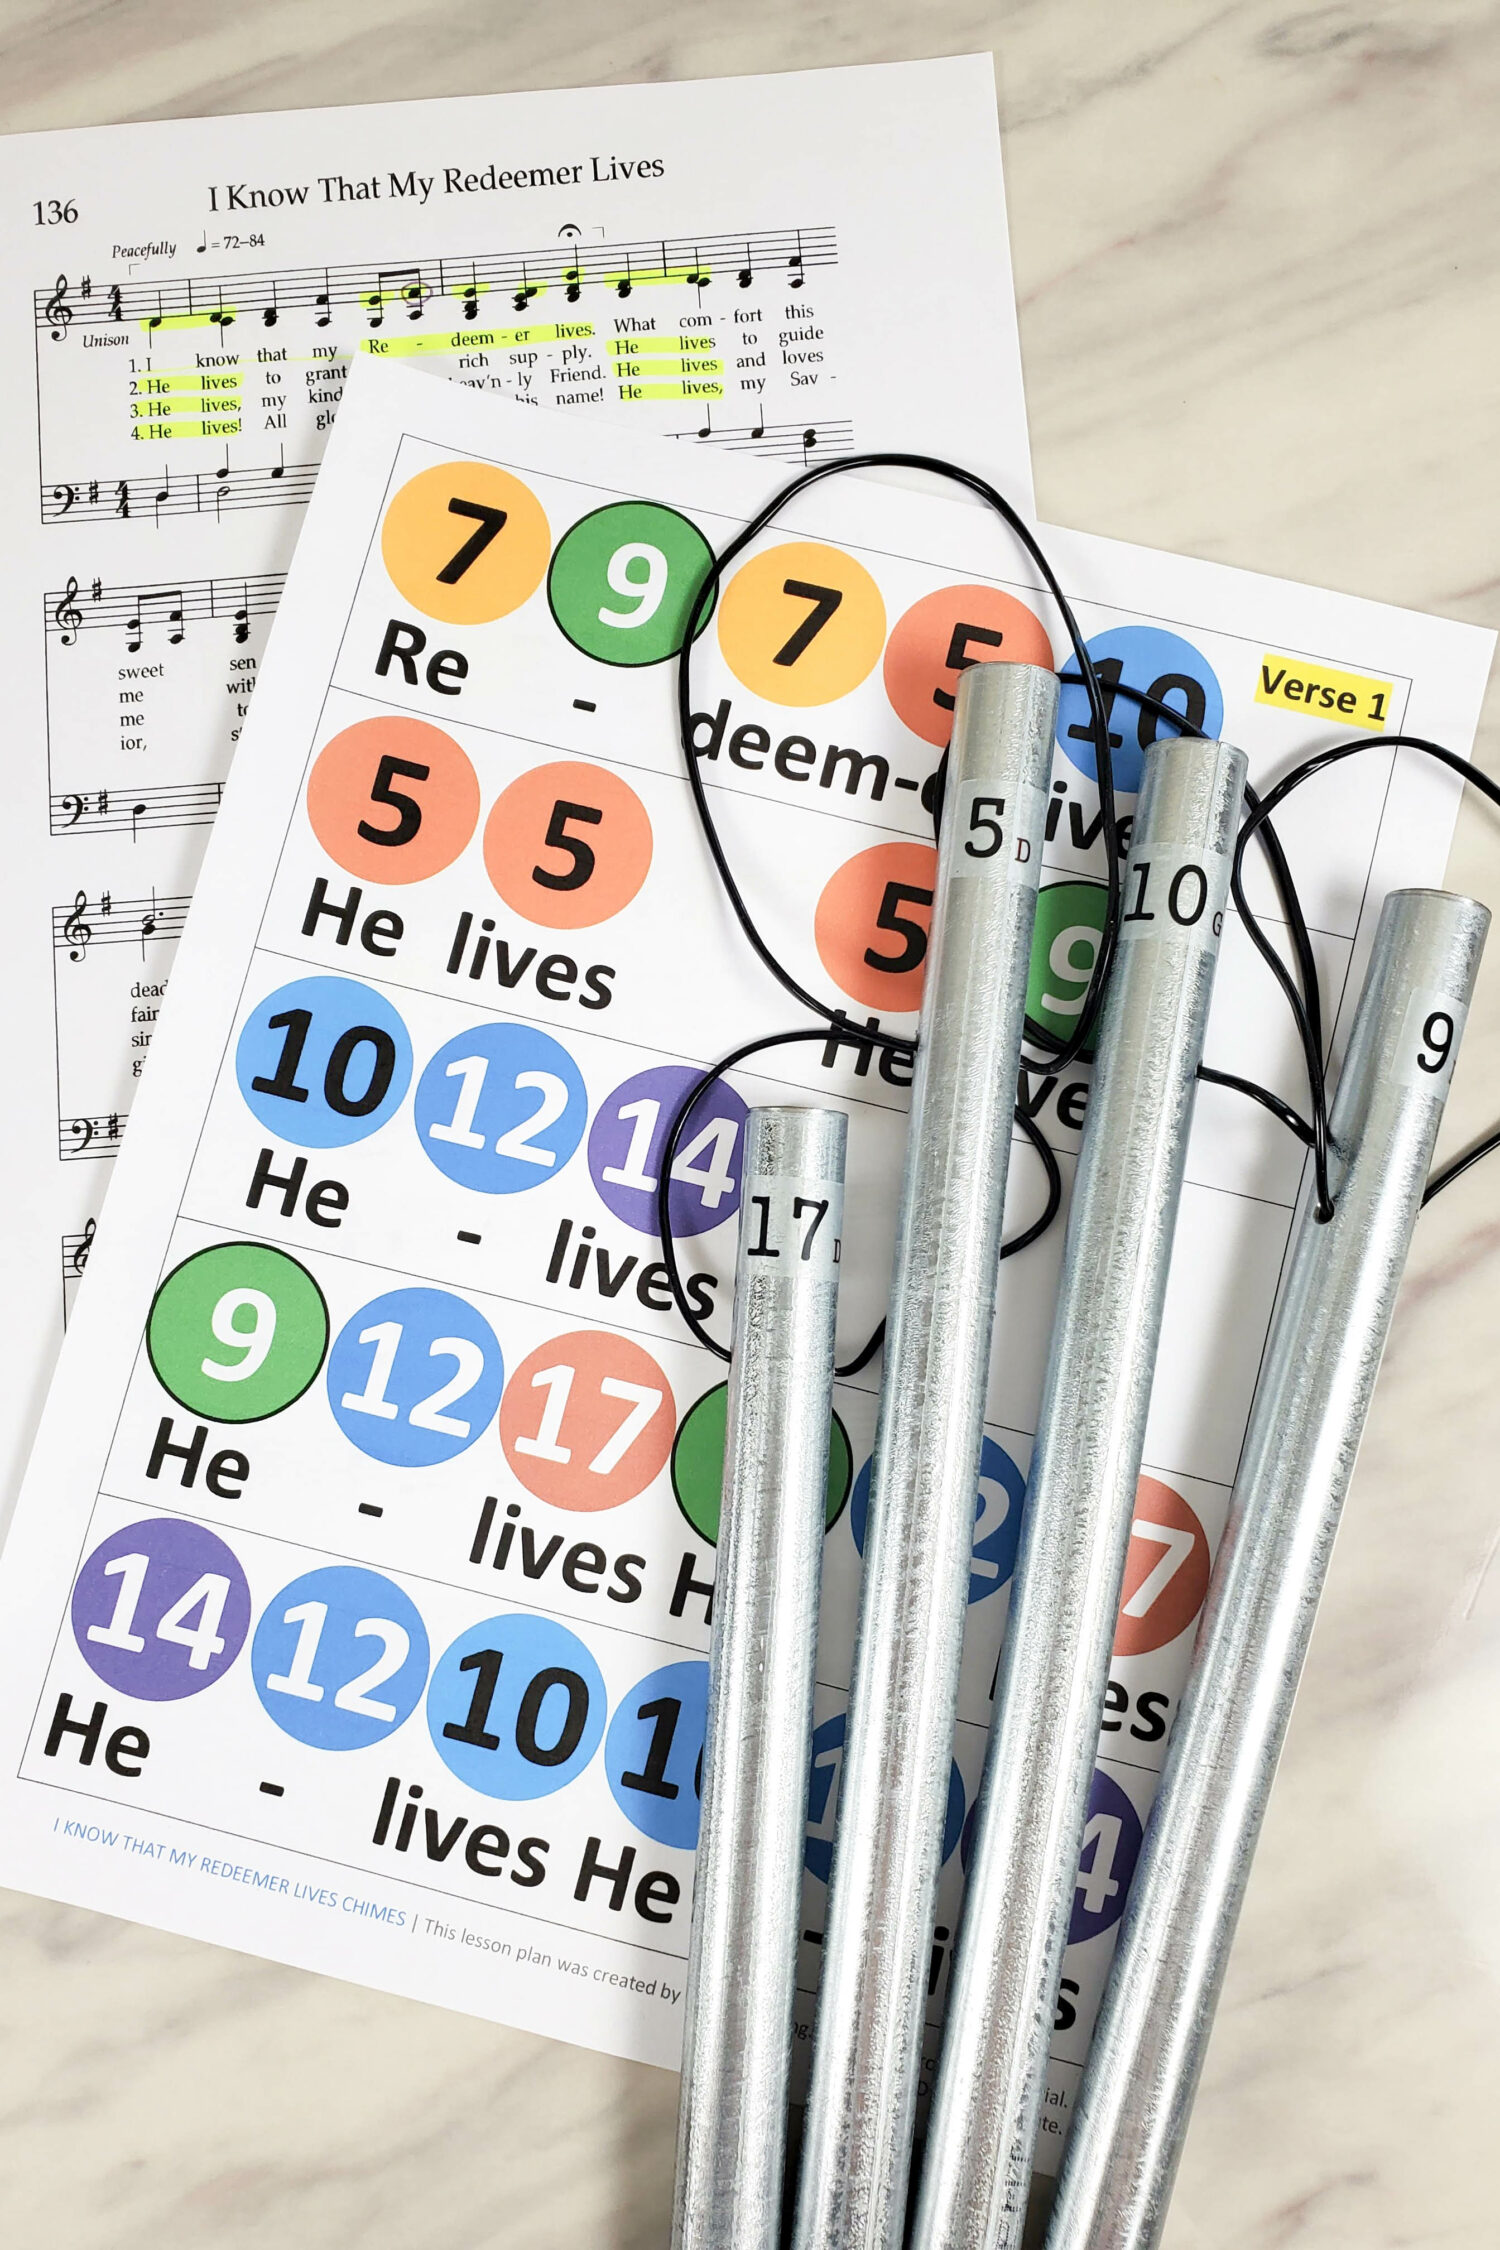 I Know That My Redeemer Lives Pipe Chimes chart singing time idea! Head over to grab this printable chime charts to help teach the hymn I Know That My Redeemer Lives in your Primary room! You'll chime for all the references to "he lives!"